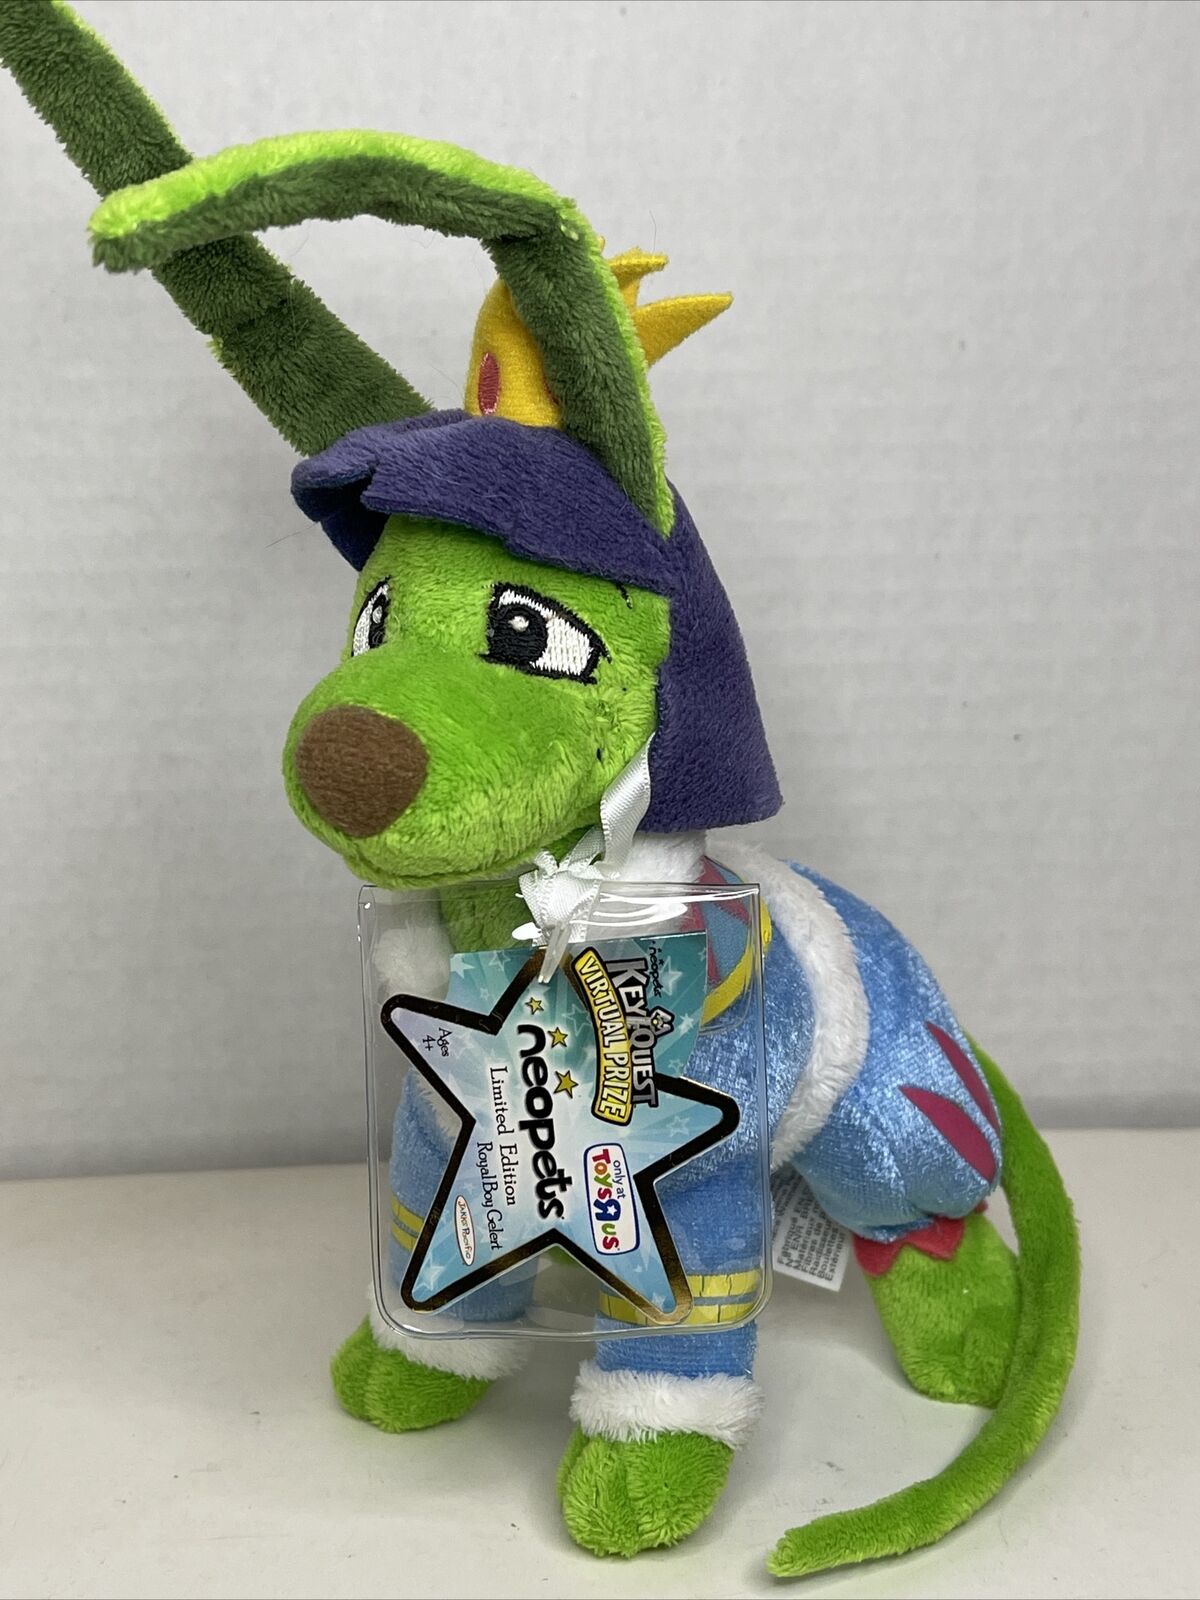 Neopets Royal Bot Gelert Ranking TOP5 Ranking TOP12 Keyquest Edition Do Plush Green Limited